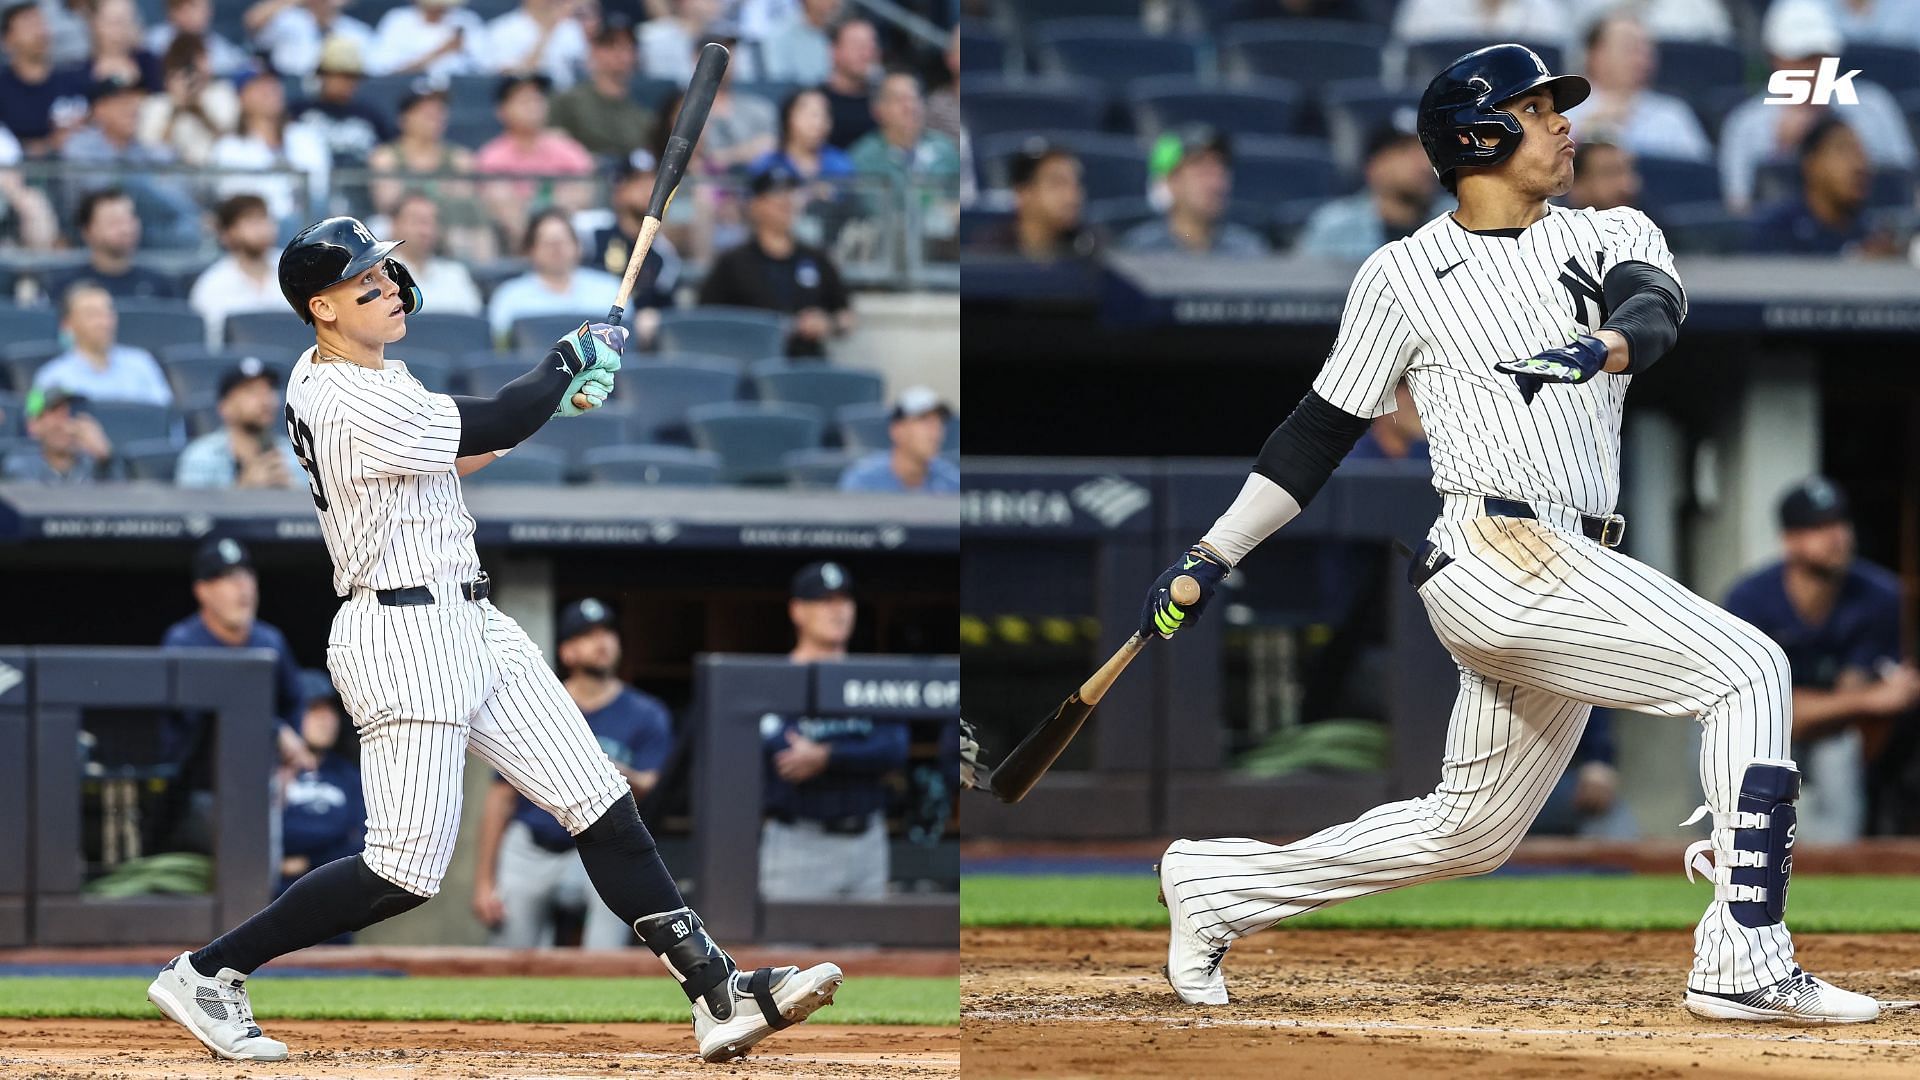 Juan Soto and Aaron Judge on pace to join these two historic home run duos for the Yankees